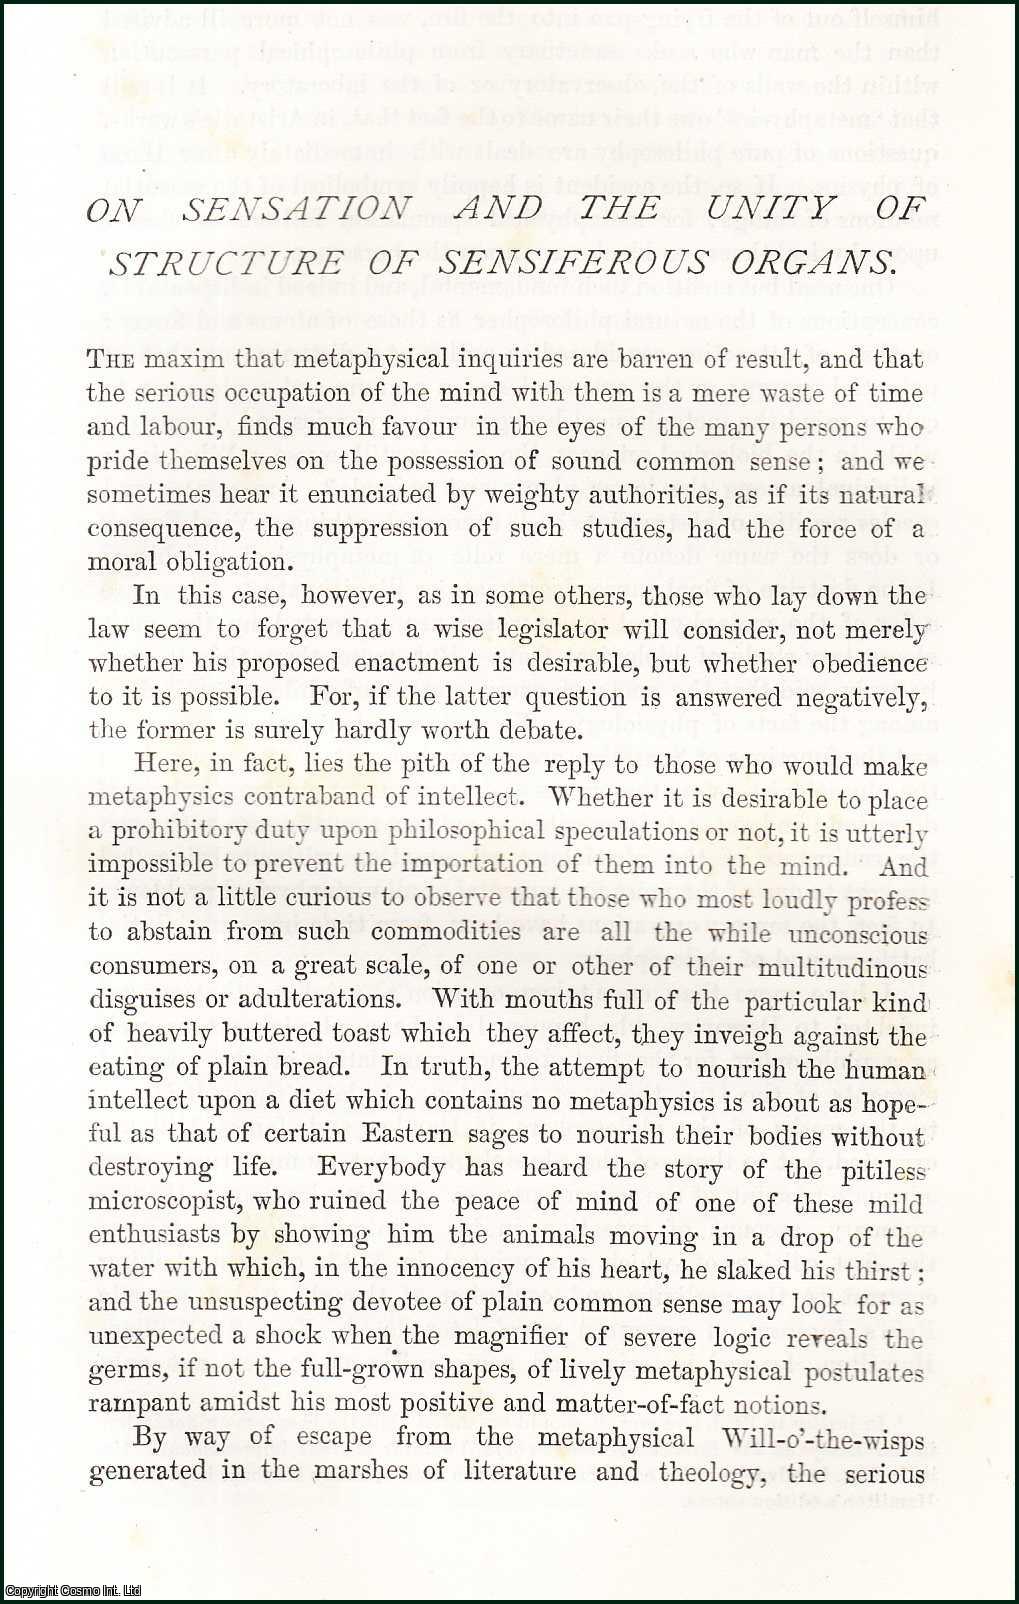 Thomas H. Huxley - On Sensation and the Unity of Structure of Sensiferous Organs. An original article from the Nineteenth Century Magazine, 1879.